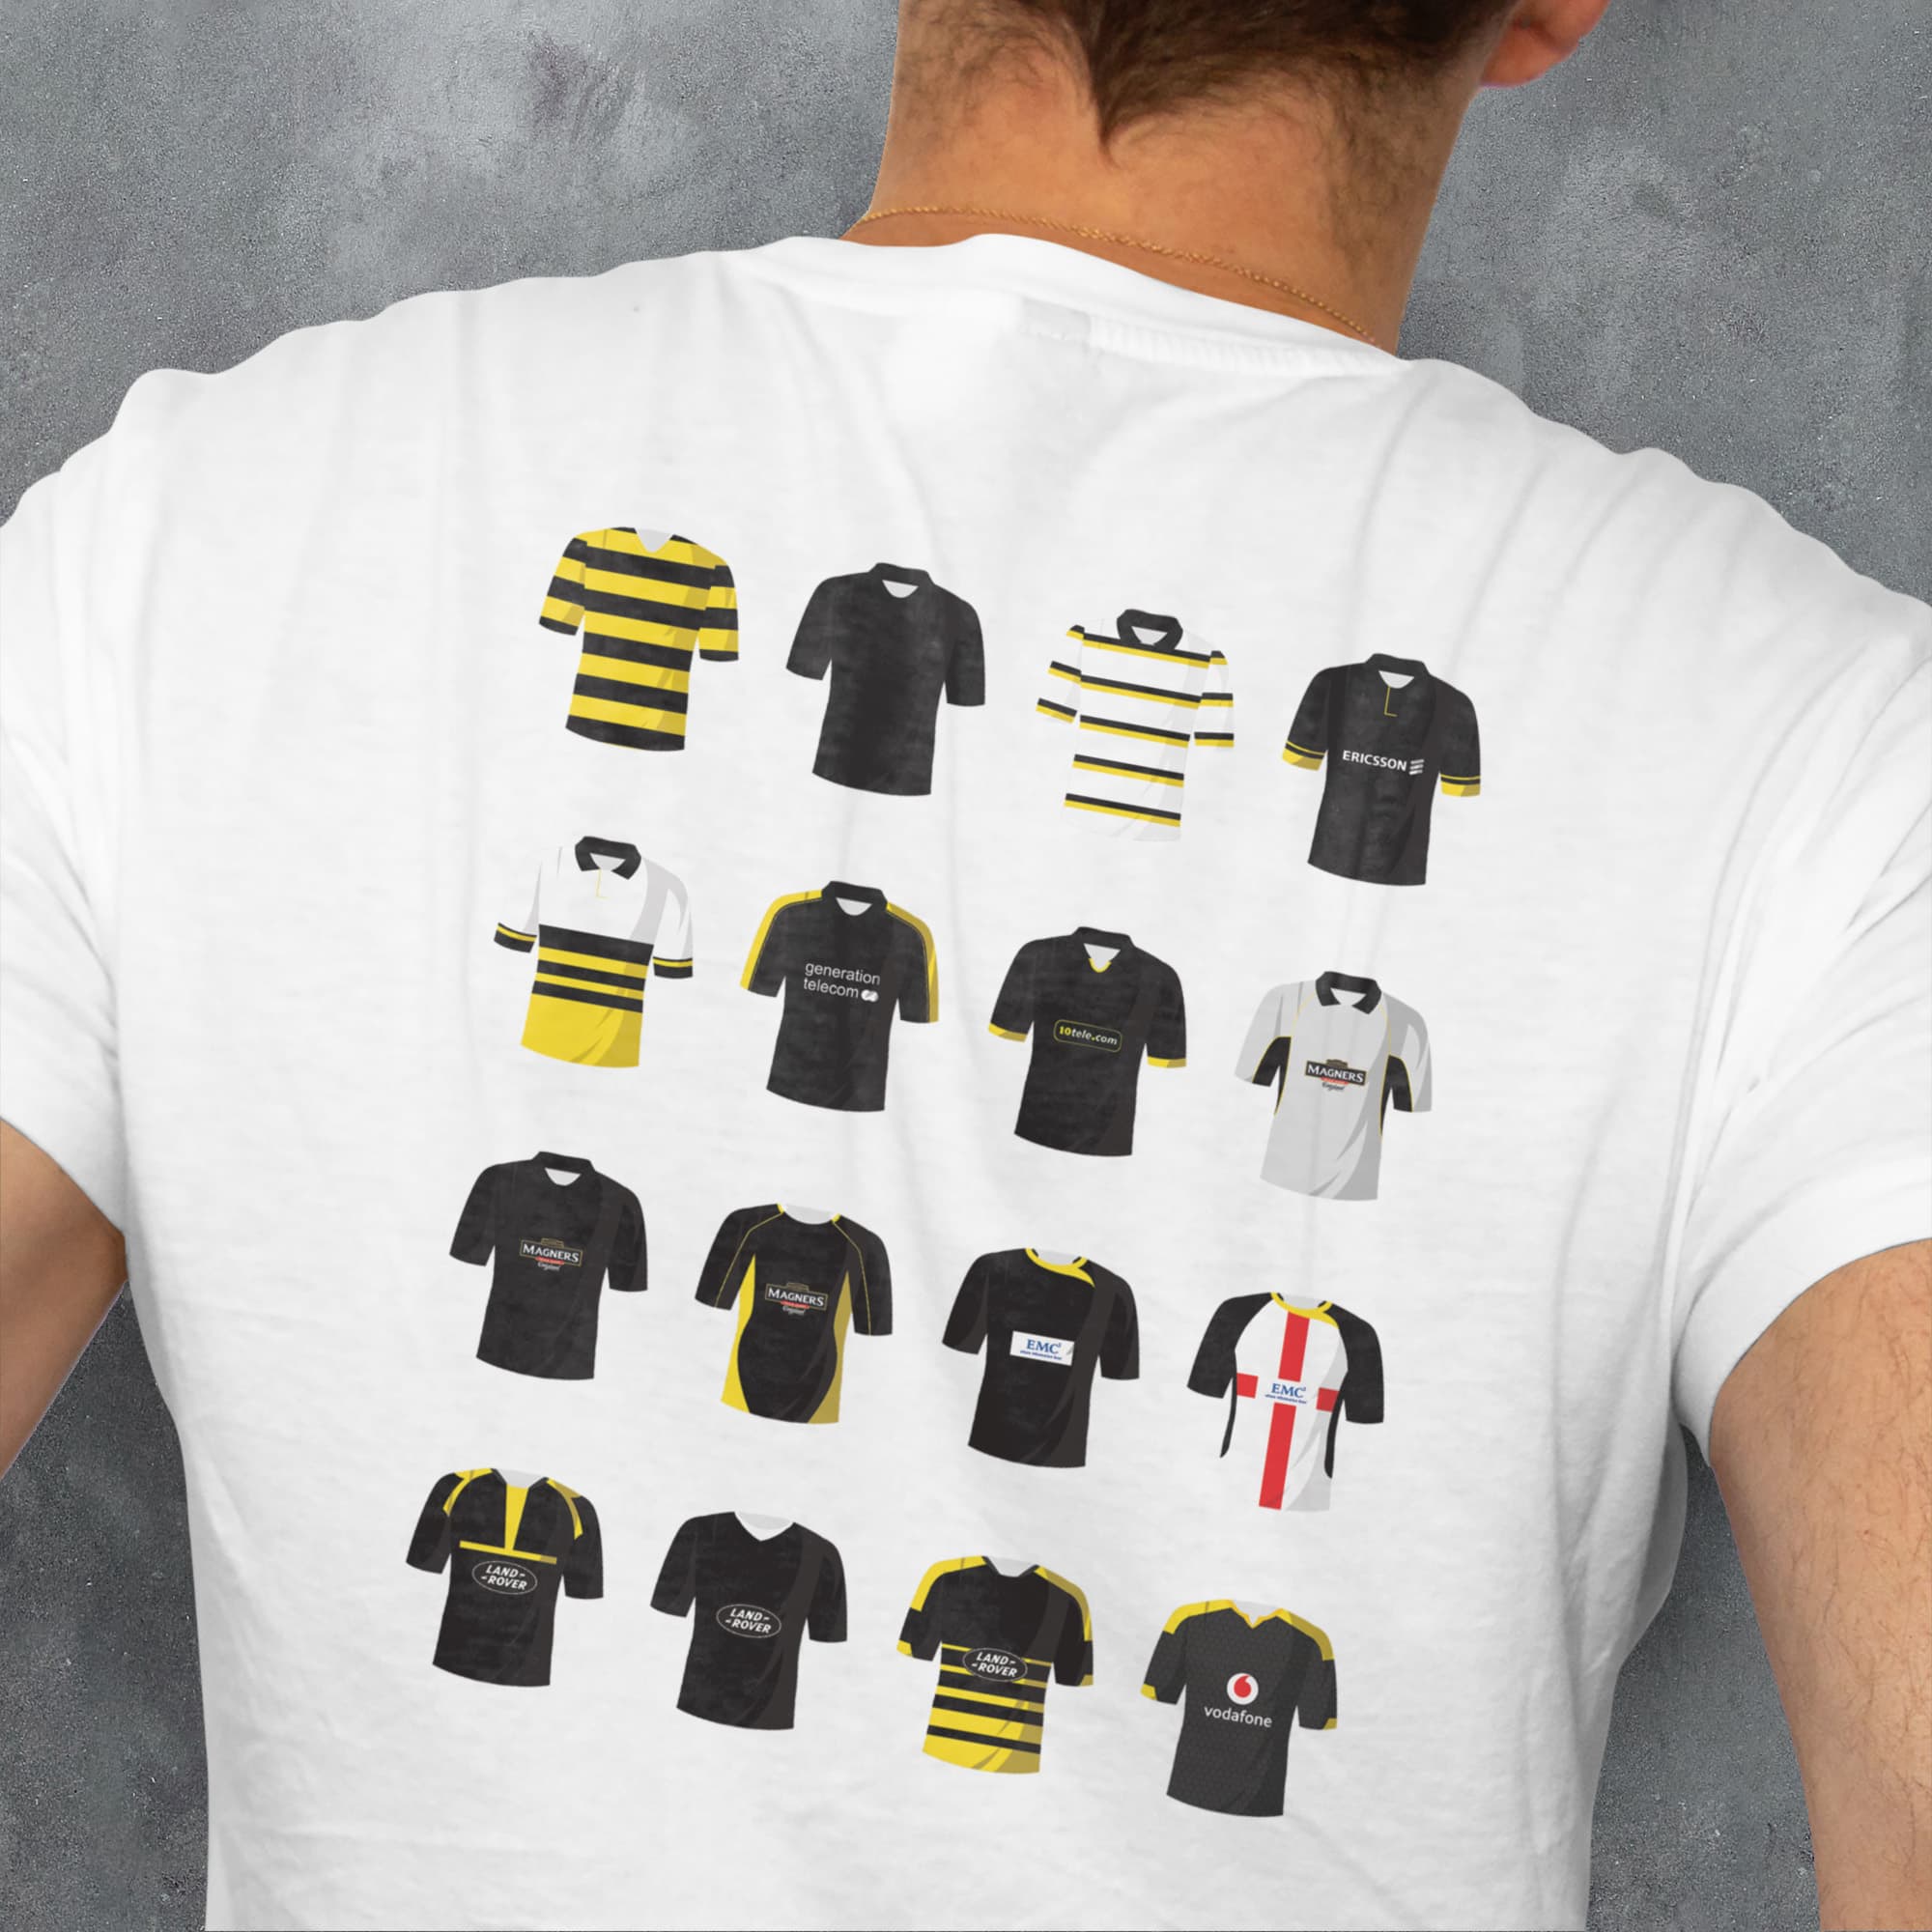 Wasps Rugby Union Classic Kits T-Shirt